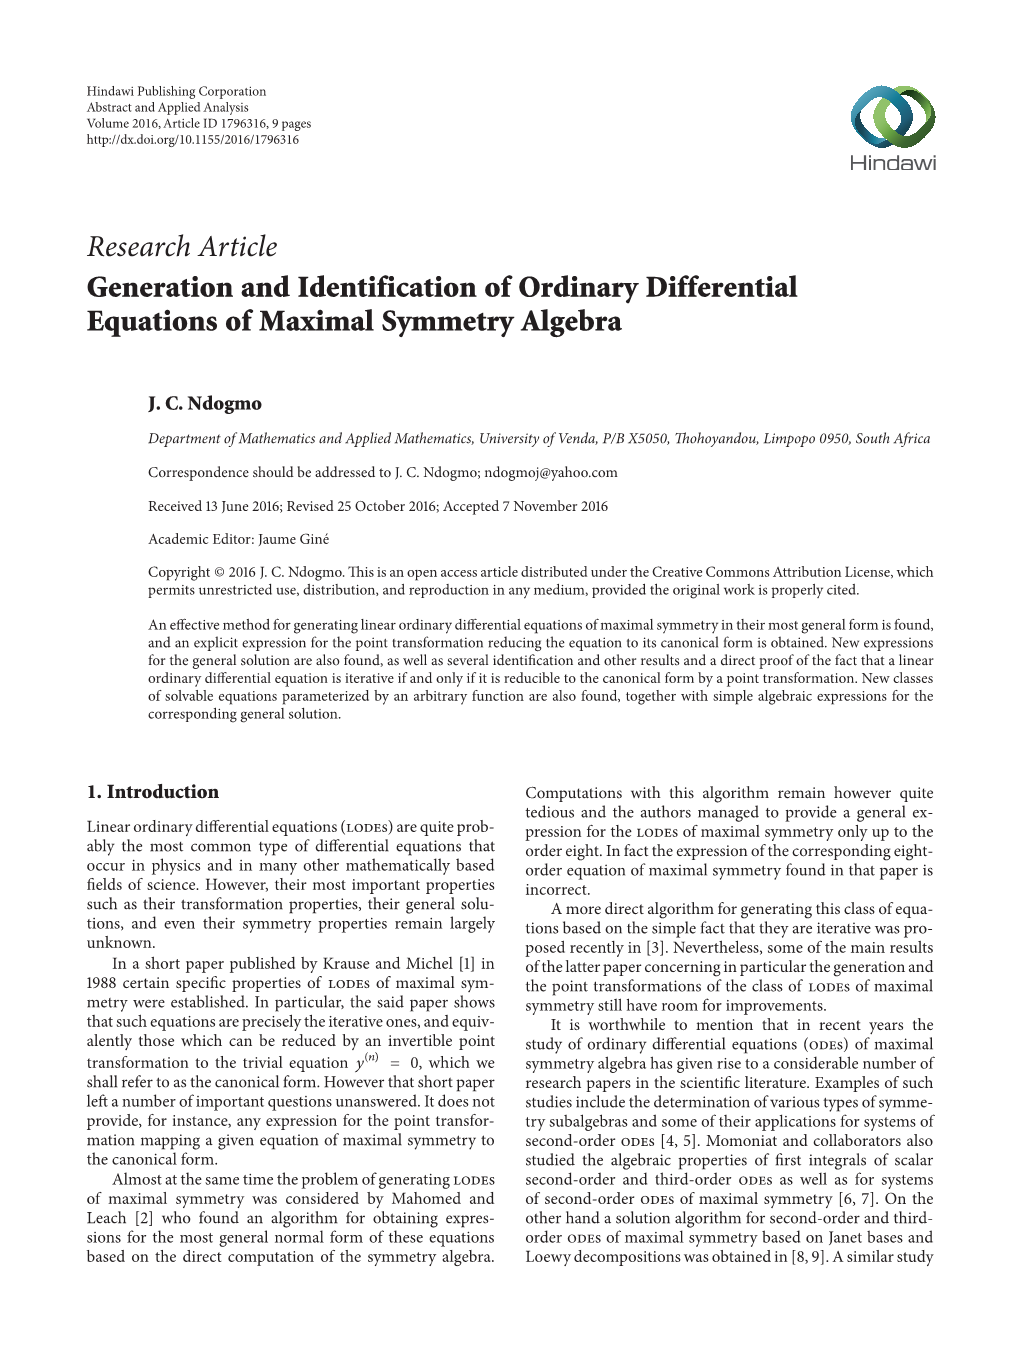 Research Article Generation and Identification of Ordinary Differential Equations of Maximal Symmetry Algebra